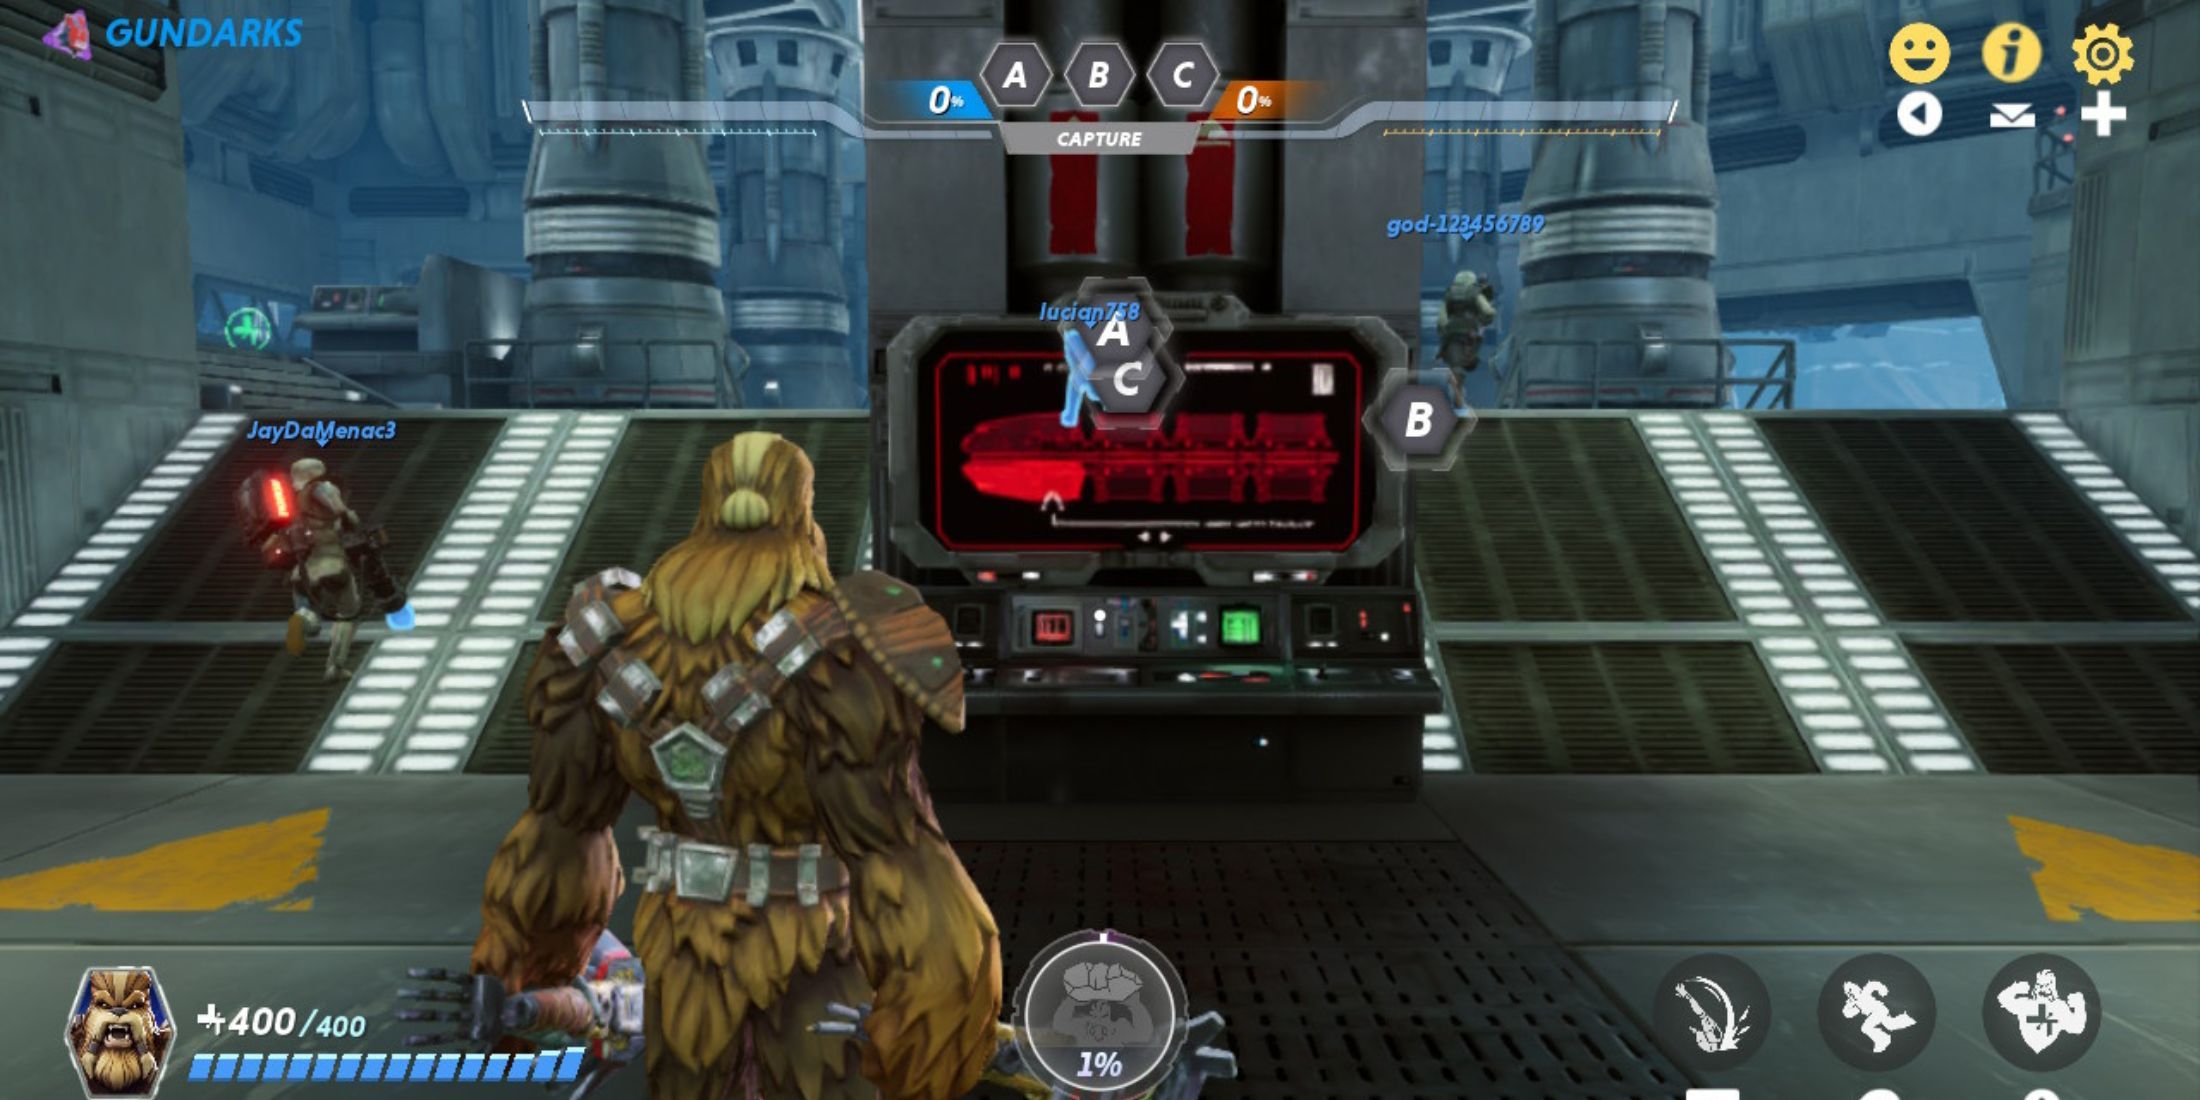 A player using Grozz in a match in Star Wars: Hunters